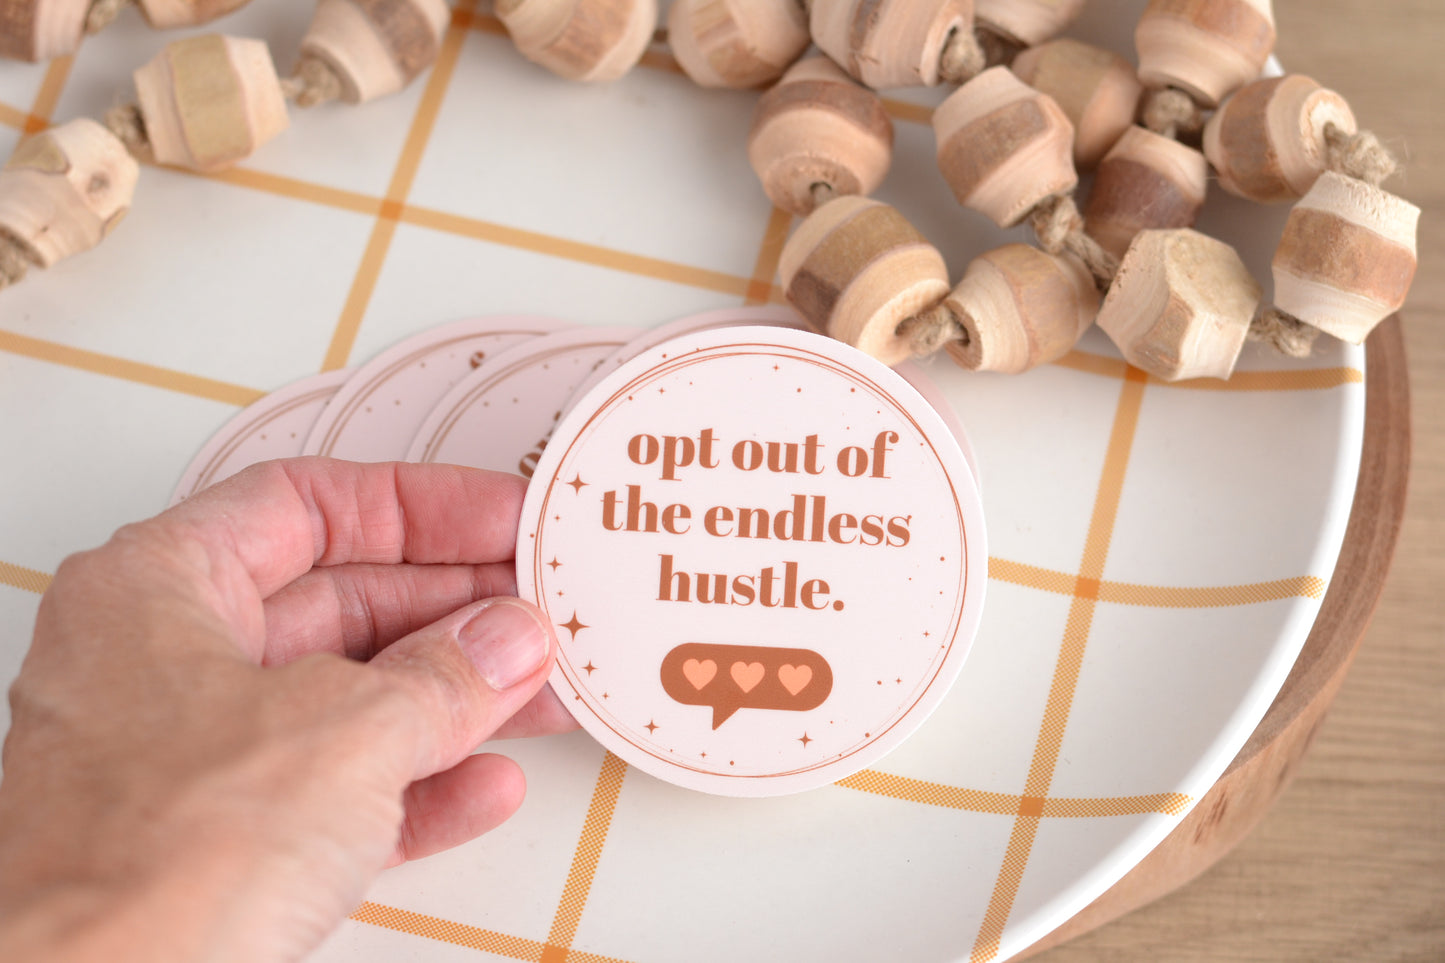 Opt out of the endless hustle sticker.